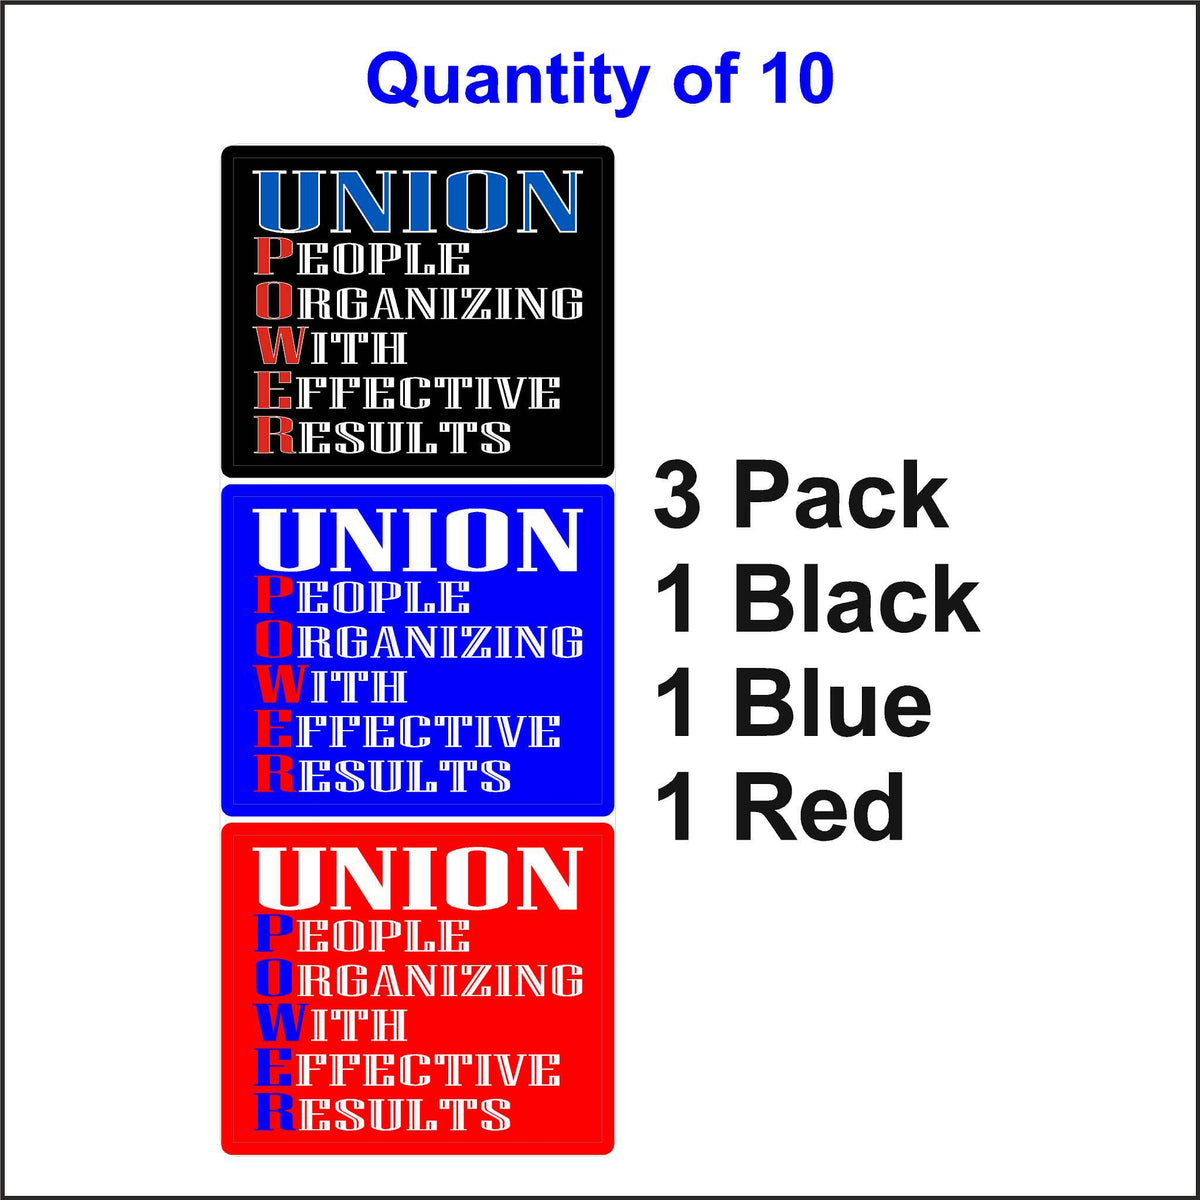 Union Power Stickers. One Black, One Blue, and One Red. 10 Quantity.